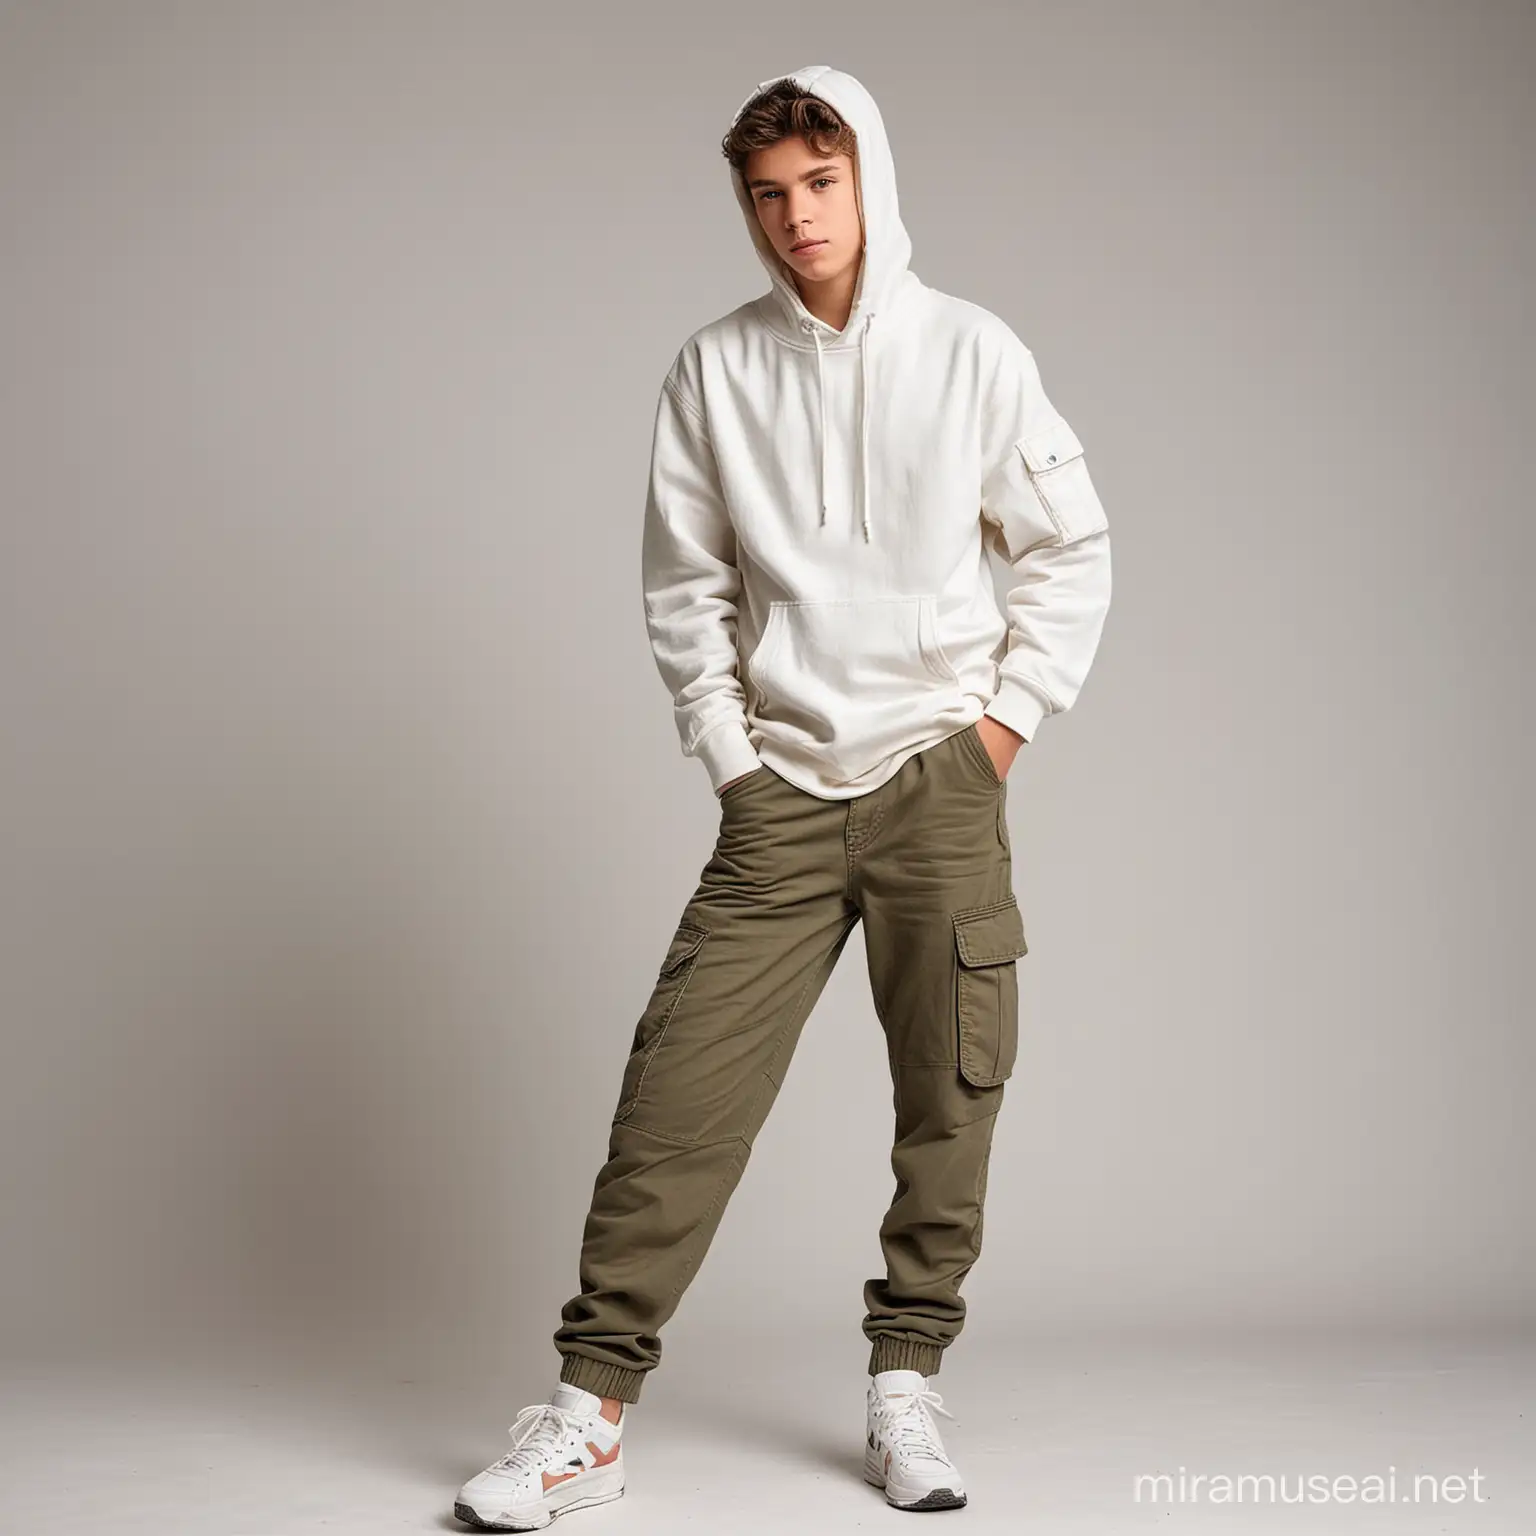 Stylish Teenage Boy in Classic Hoodie and Cargo Pants on White Background